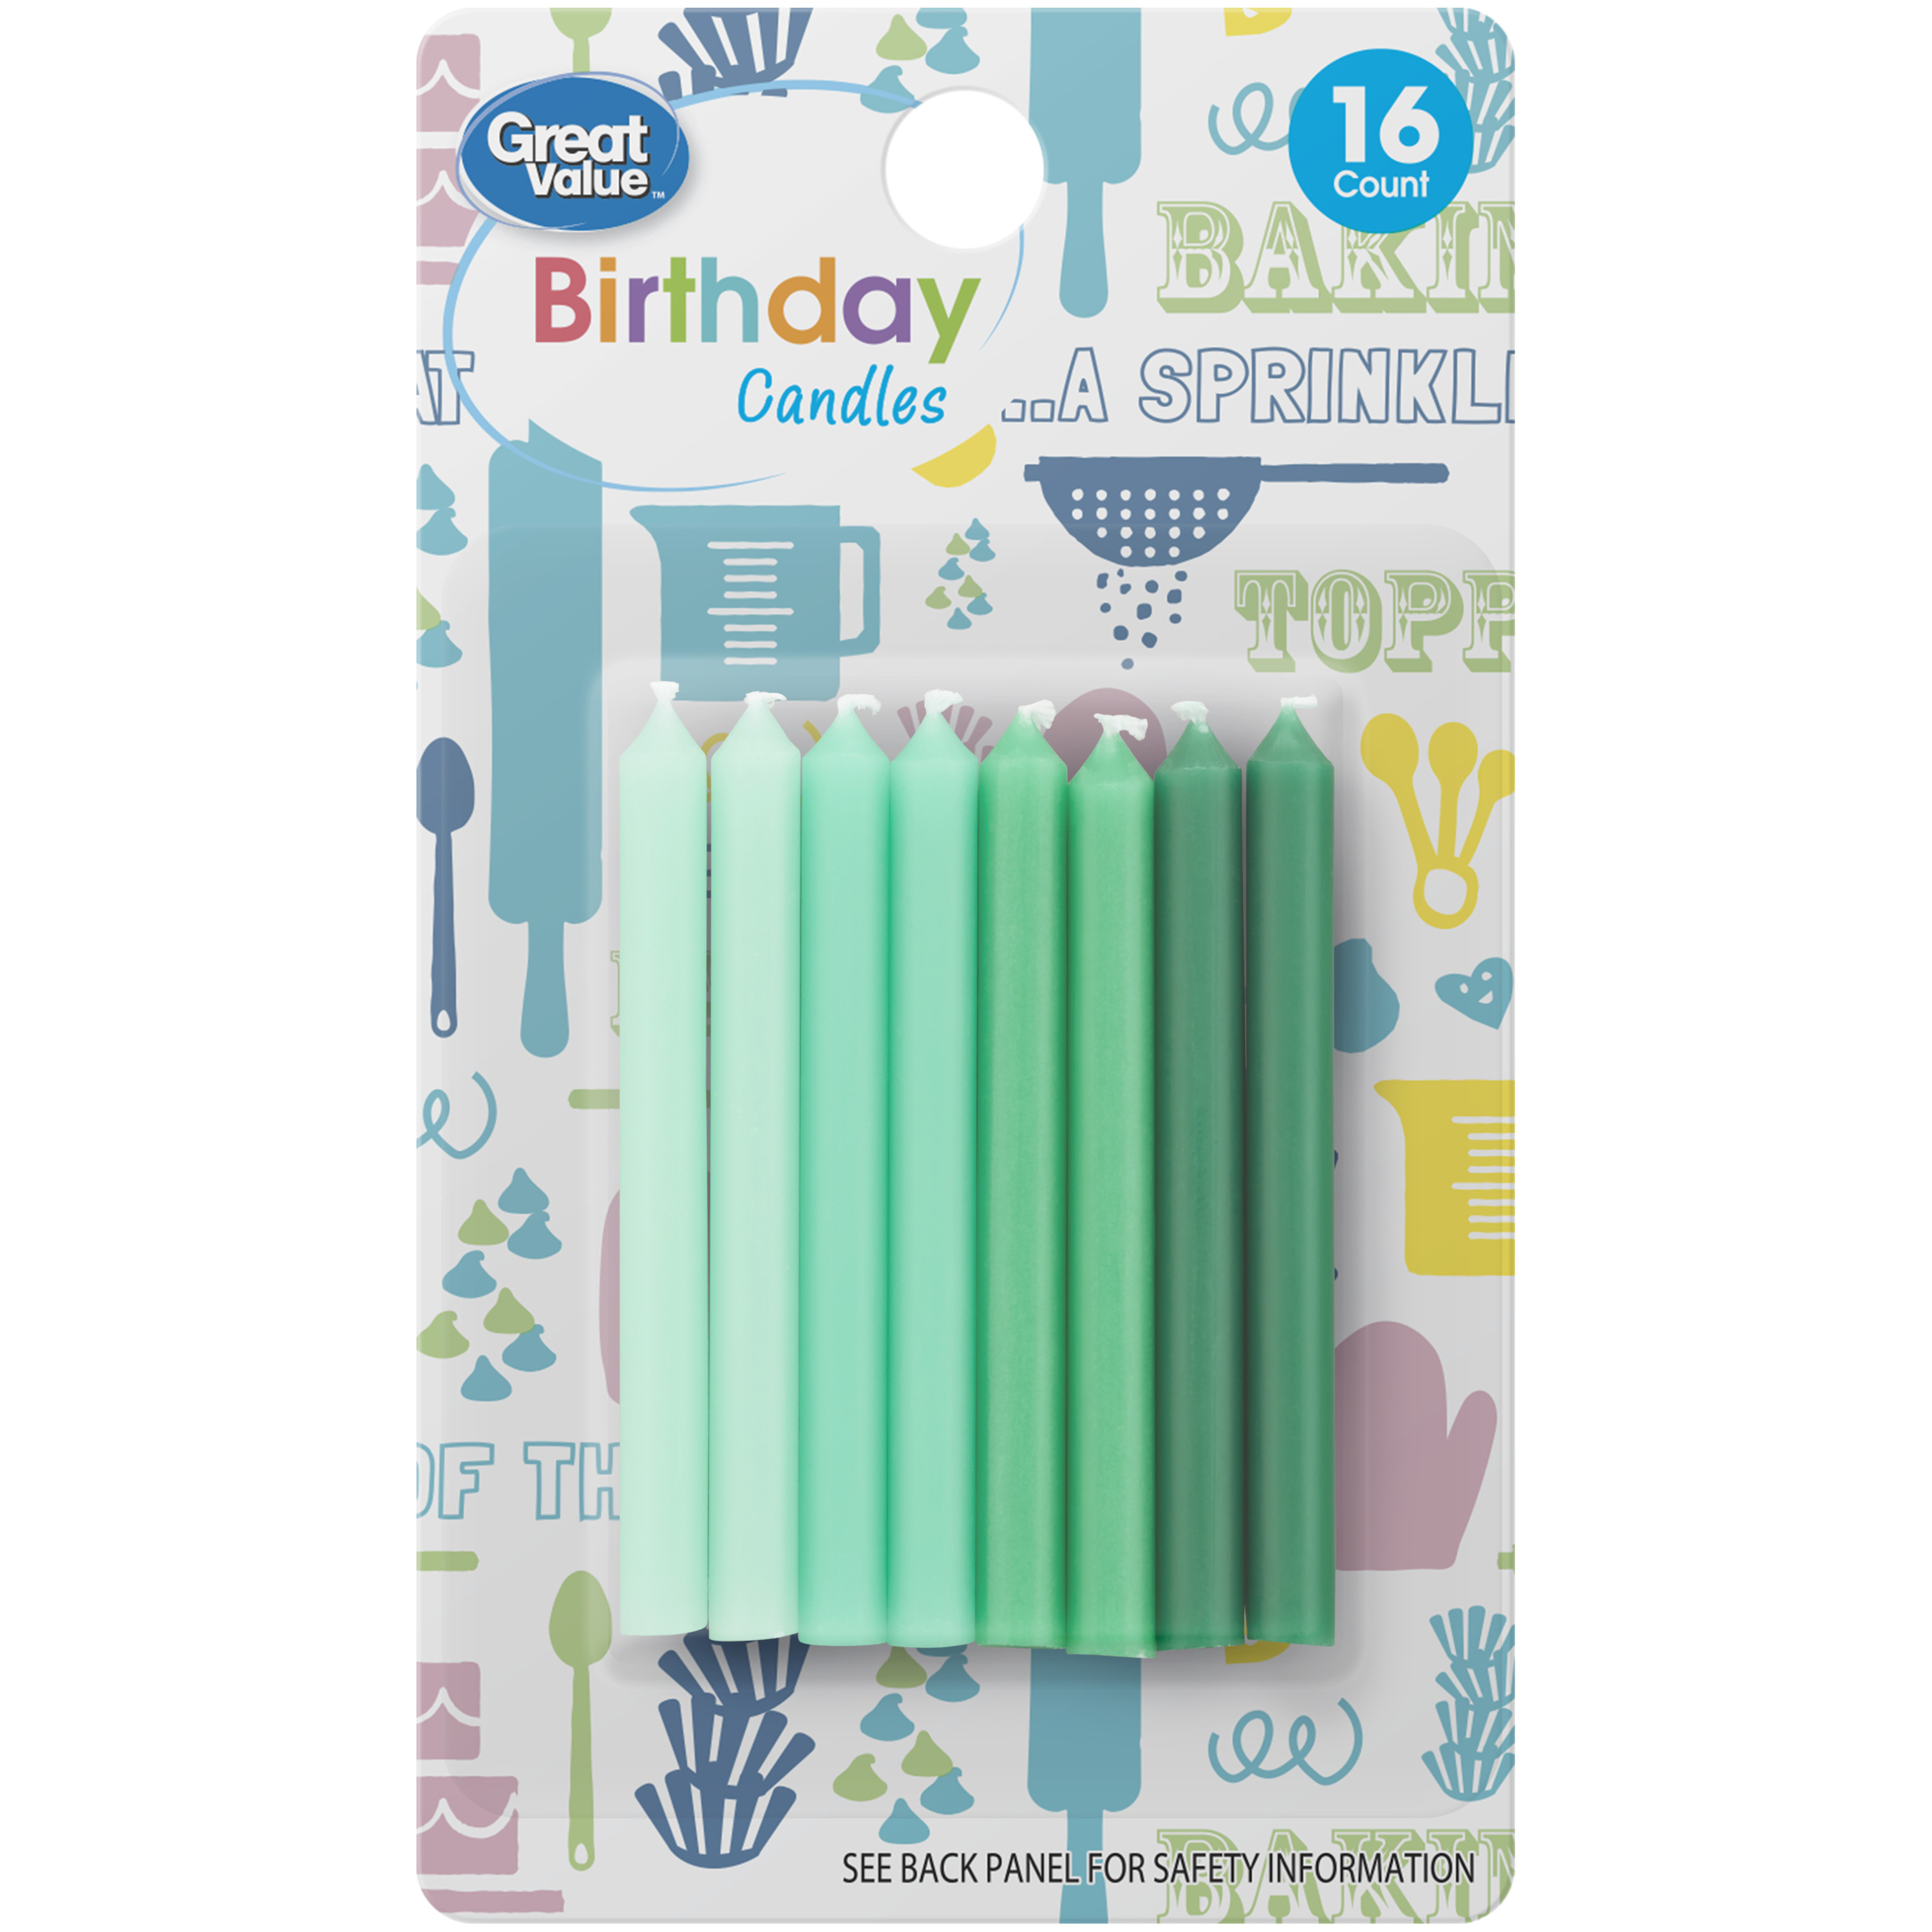 Wilton Light Green, Green and Dark Green Ombre Birthday Candles, 16-Count - image 4 of 4